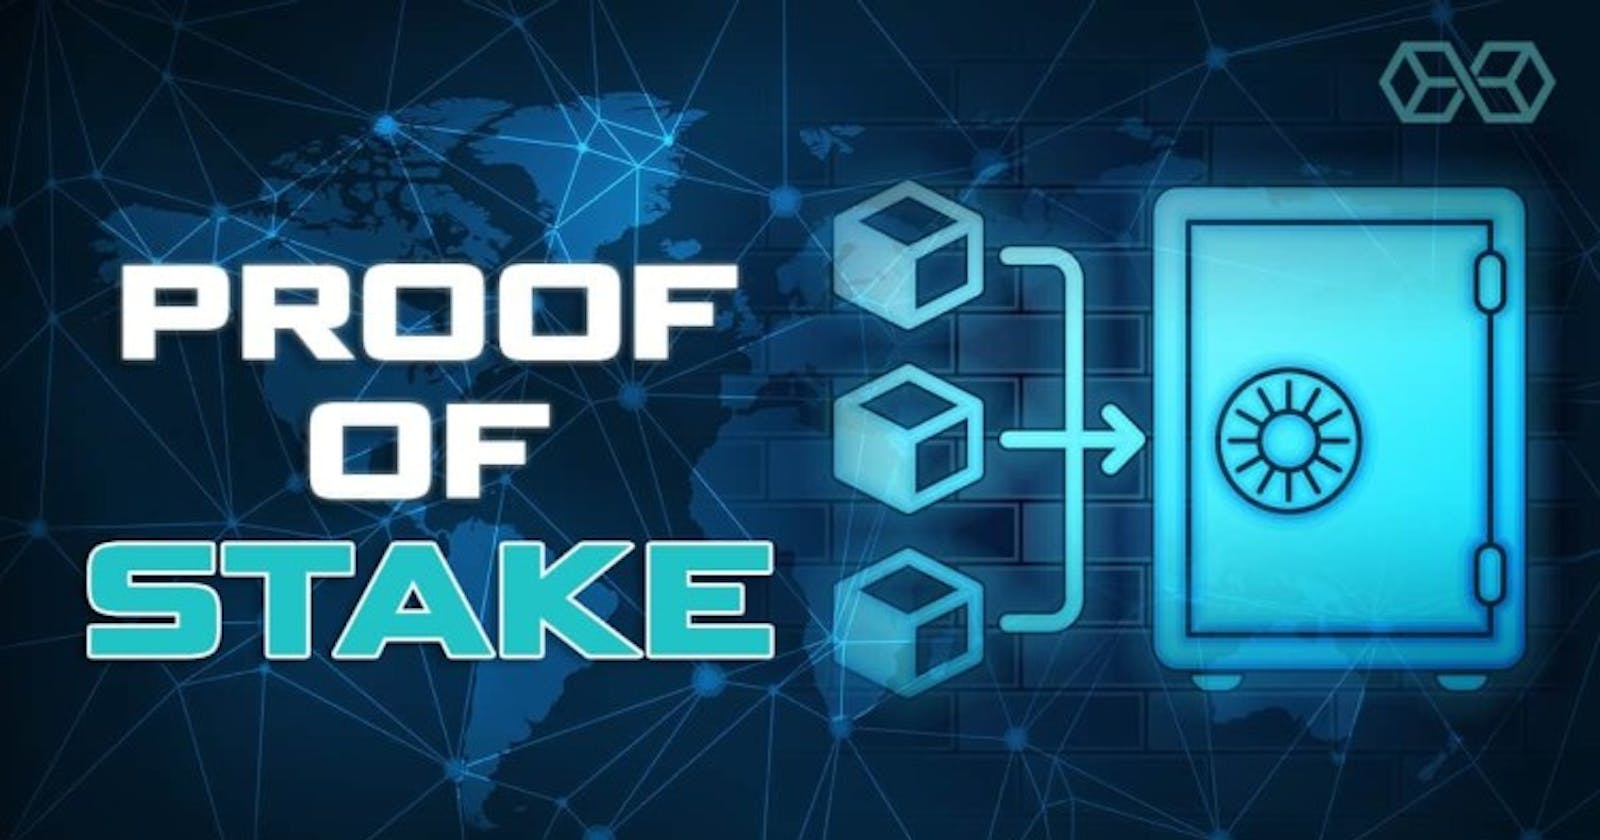 Proof of Stake (PoS): The improved consensus mechanism for cryptocurrencies